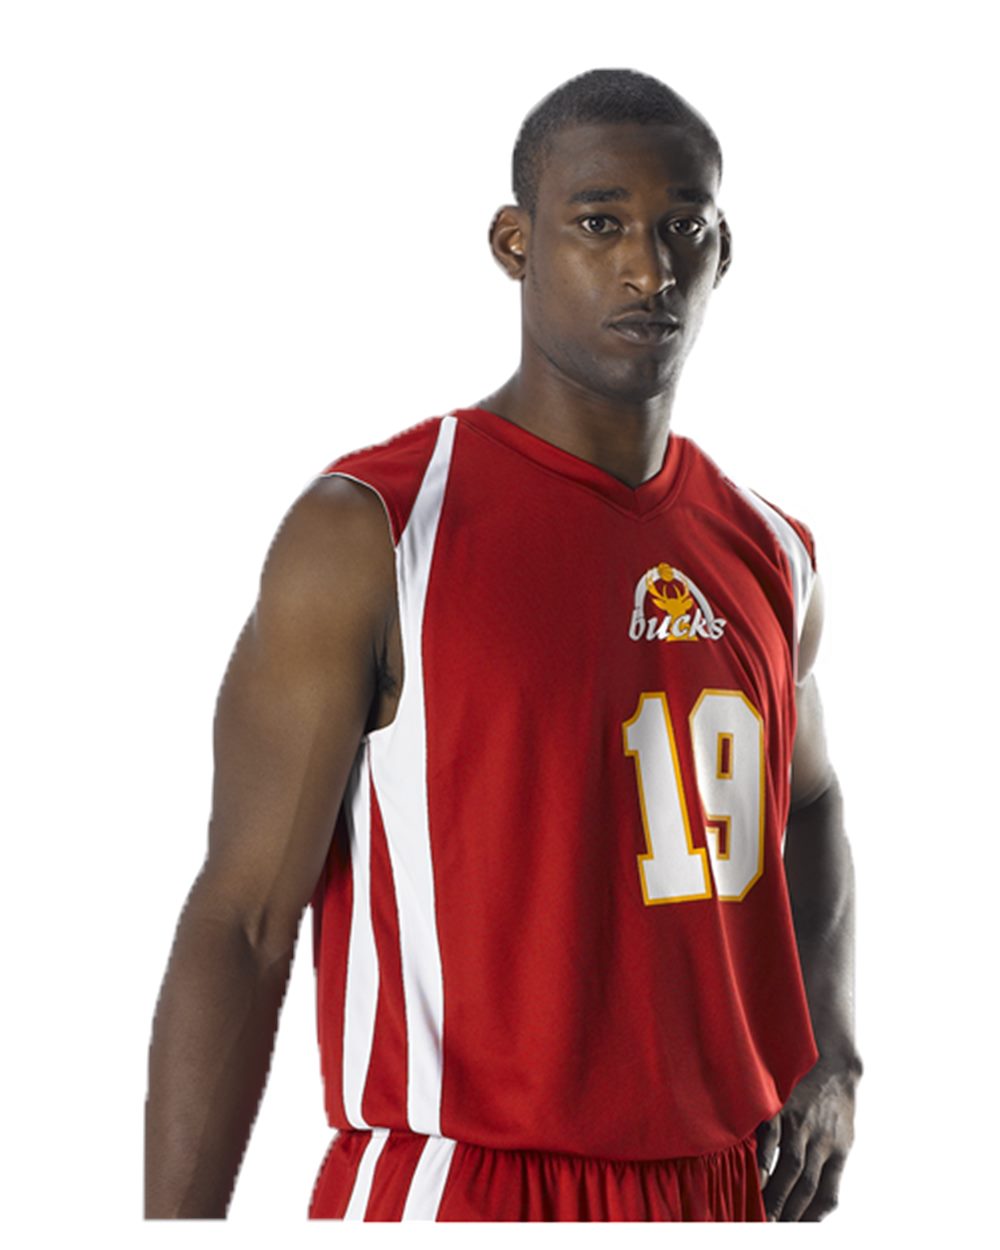 alleson athletic basketball jerseys